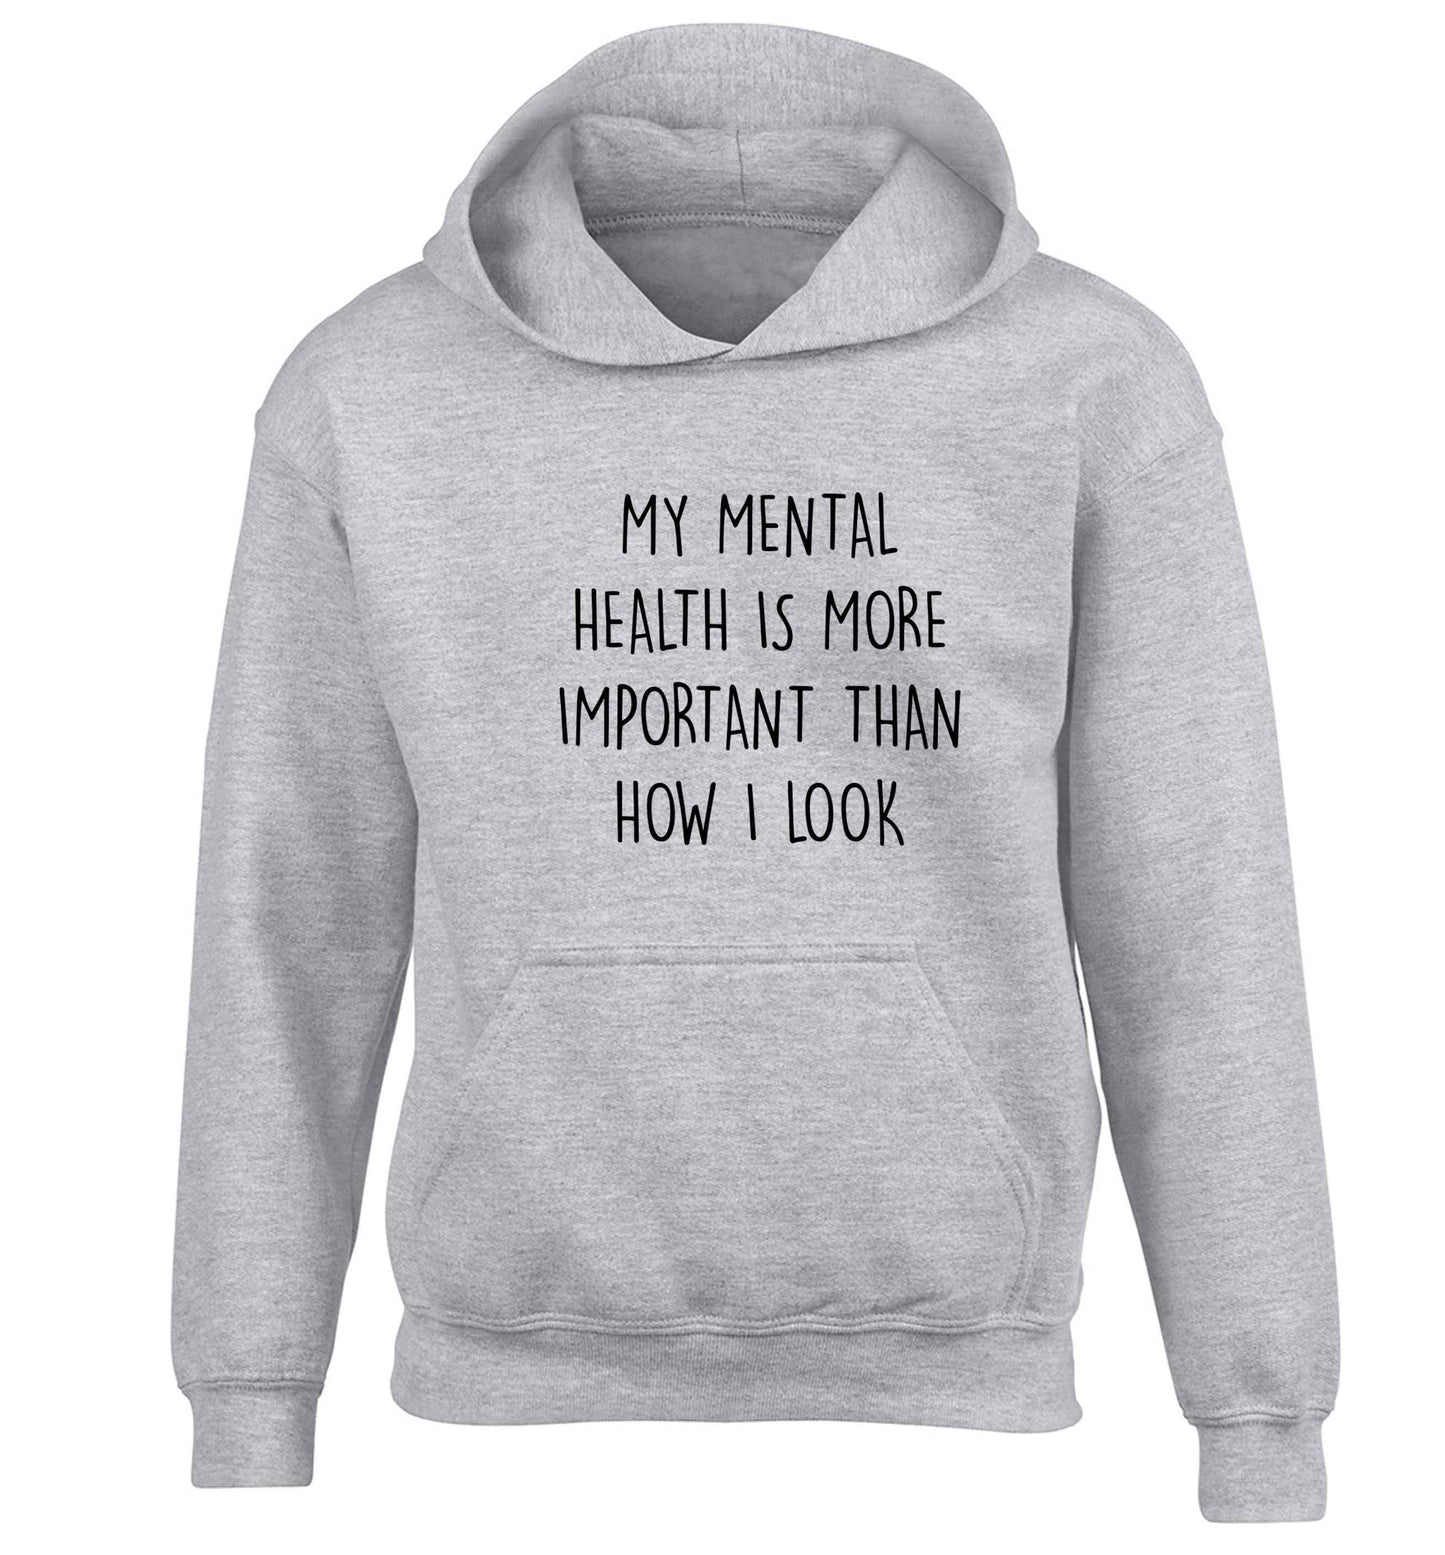 My mental health is more importnat than how I look children's grey hoodie 12-13 Years